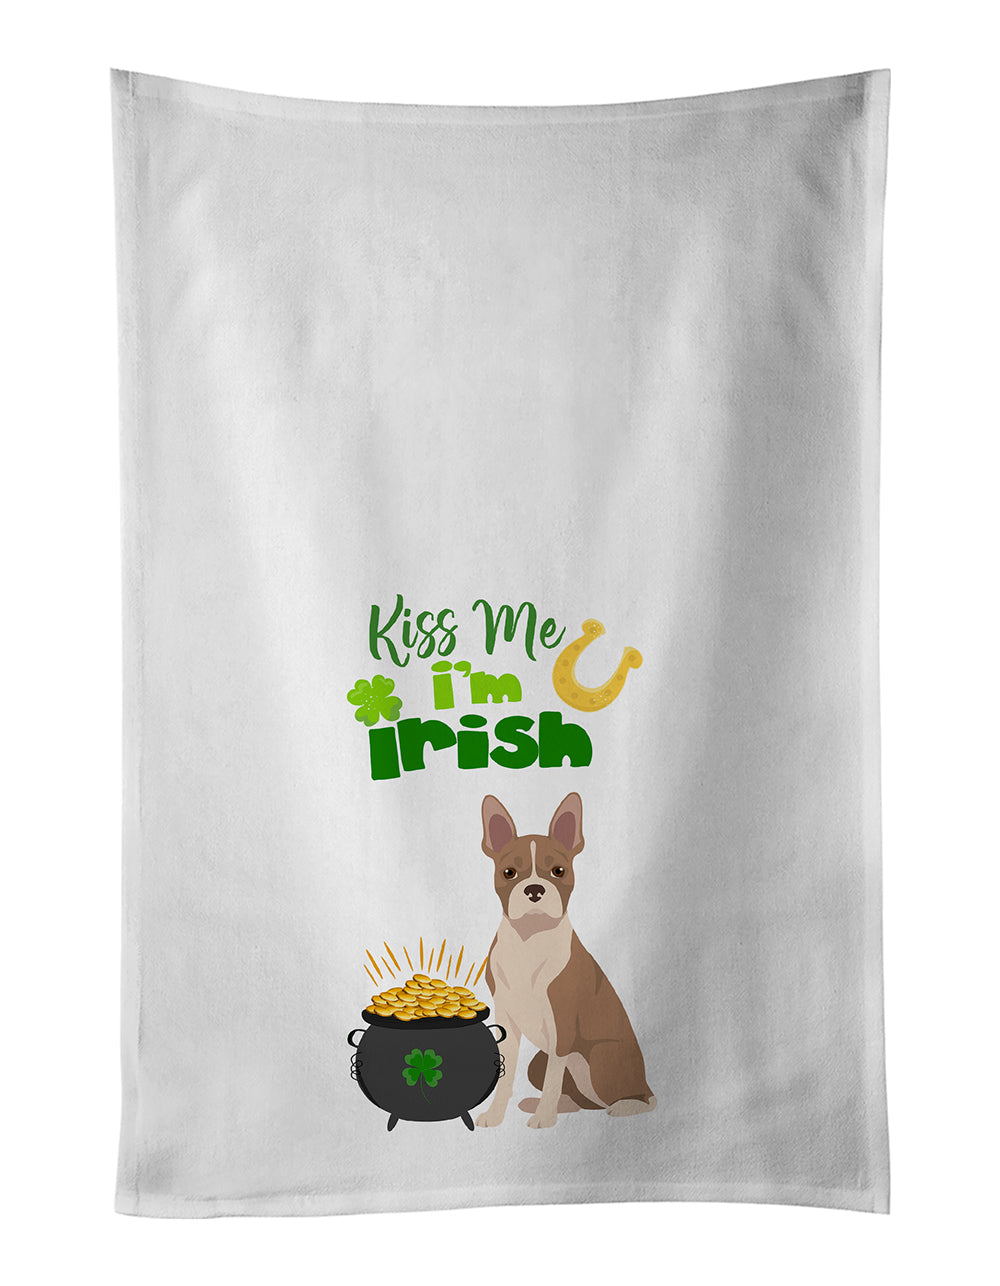 Buy this Fawn Boston Terrier St. Patrick's Day White Kitchen Towel Set of 2 Dish Towels